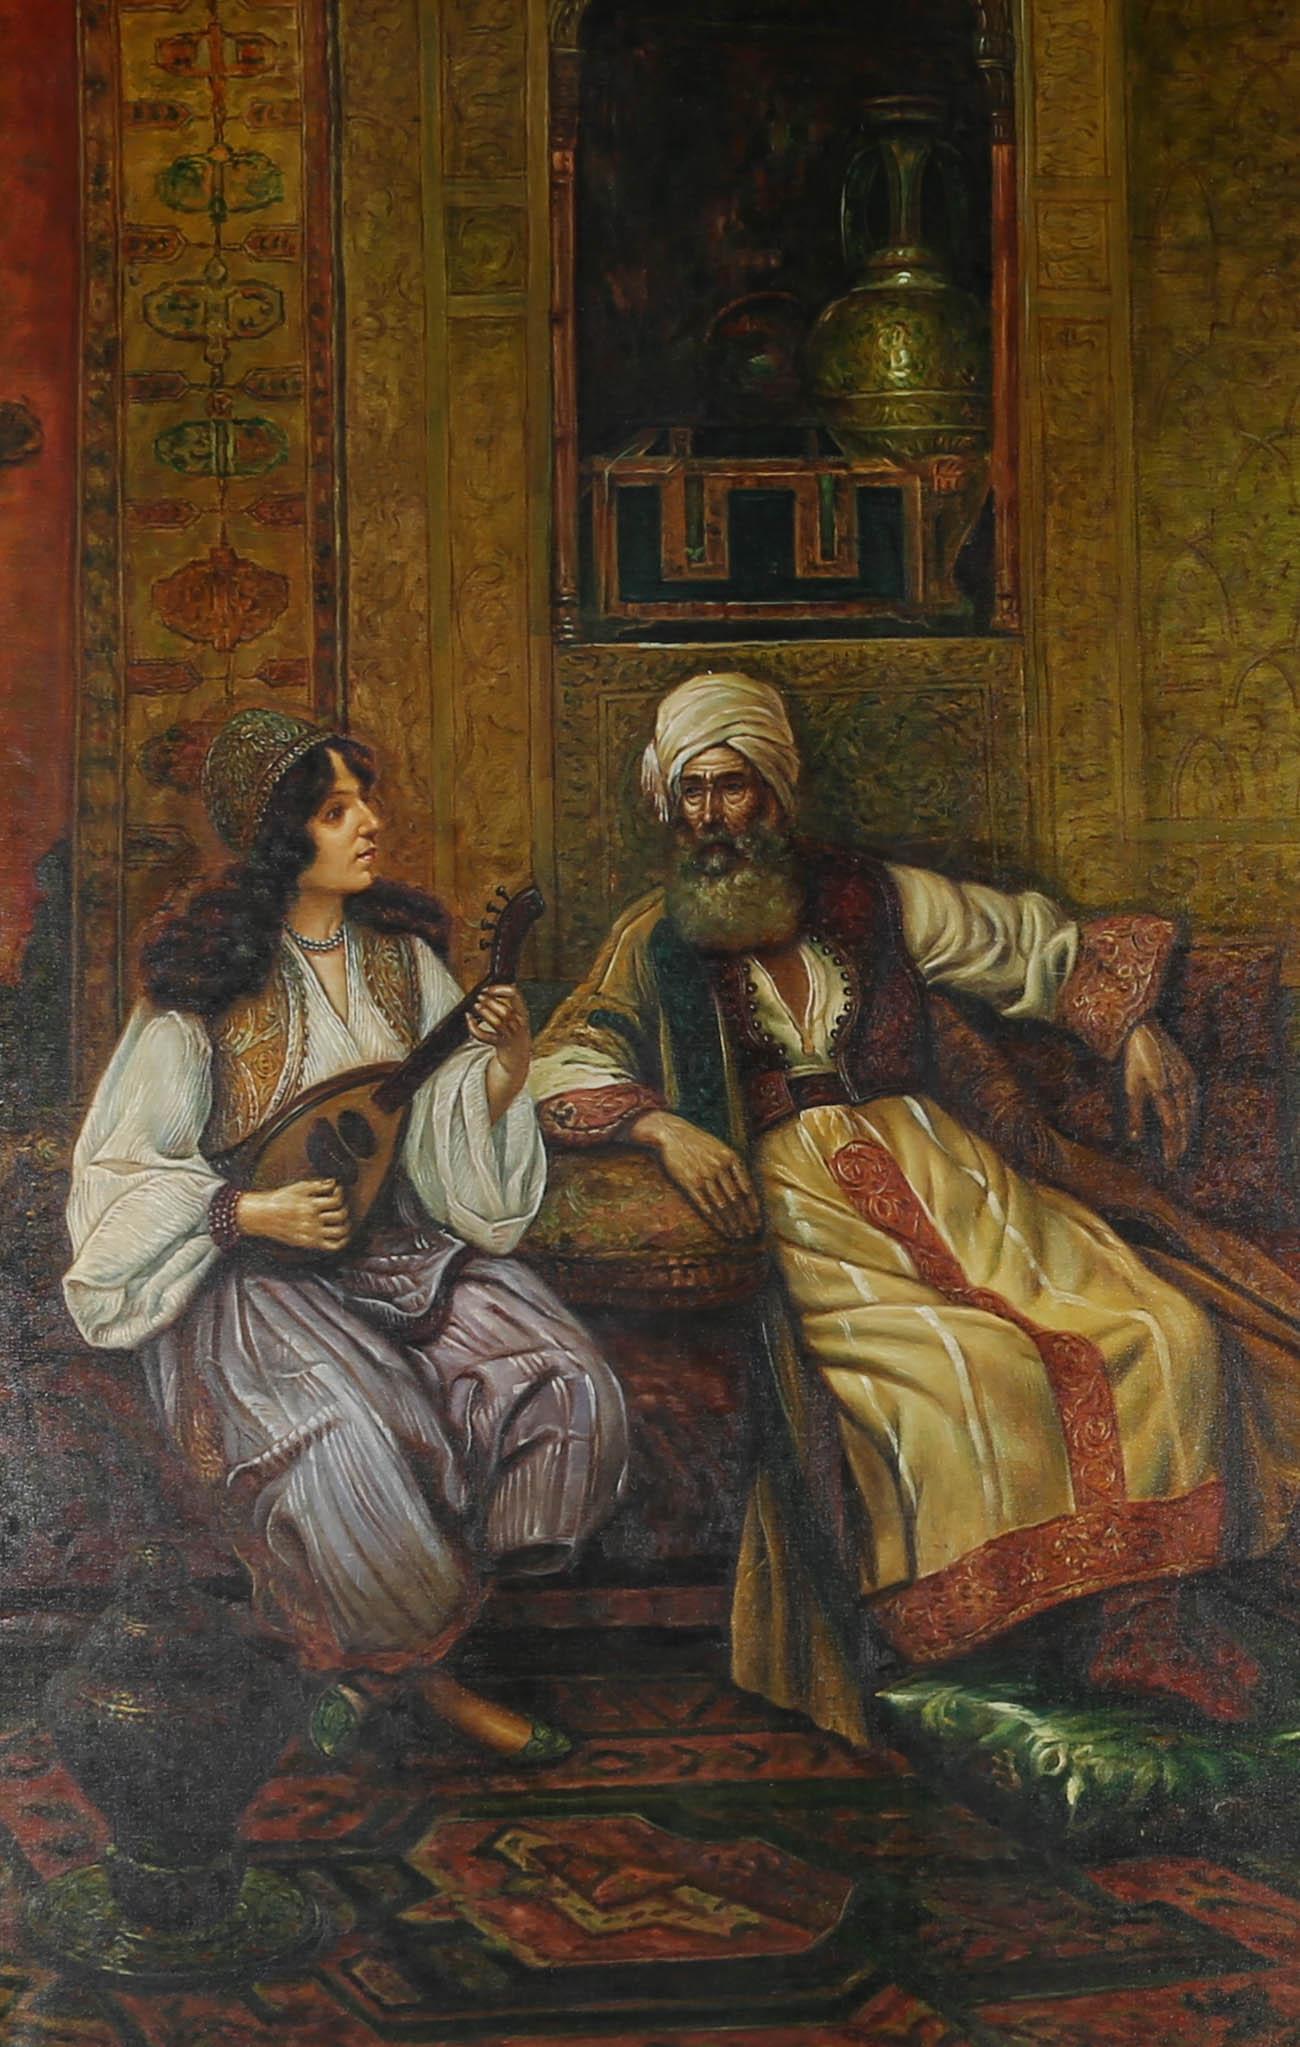 An incredibly detailed and finely executed portrait in the manner of Rudolf Ernst (1854-1932). The scene shows a young woman playing an oud or an elderly man as they sit in a lavish Arab interior with intricately patterned walls and carpets. The